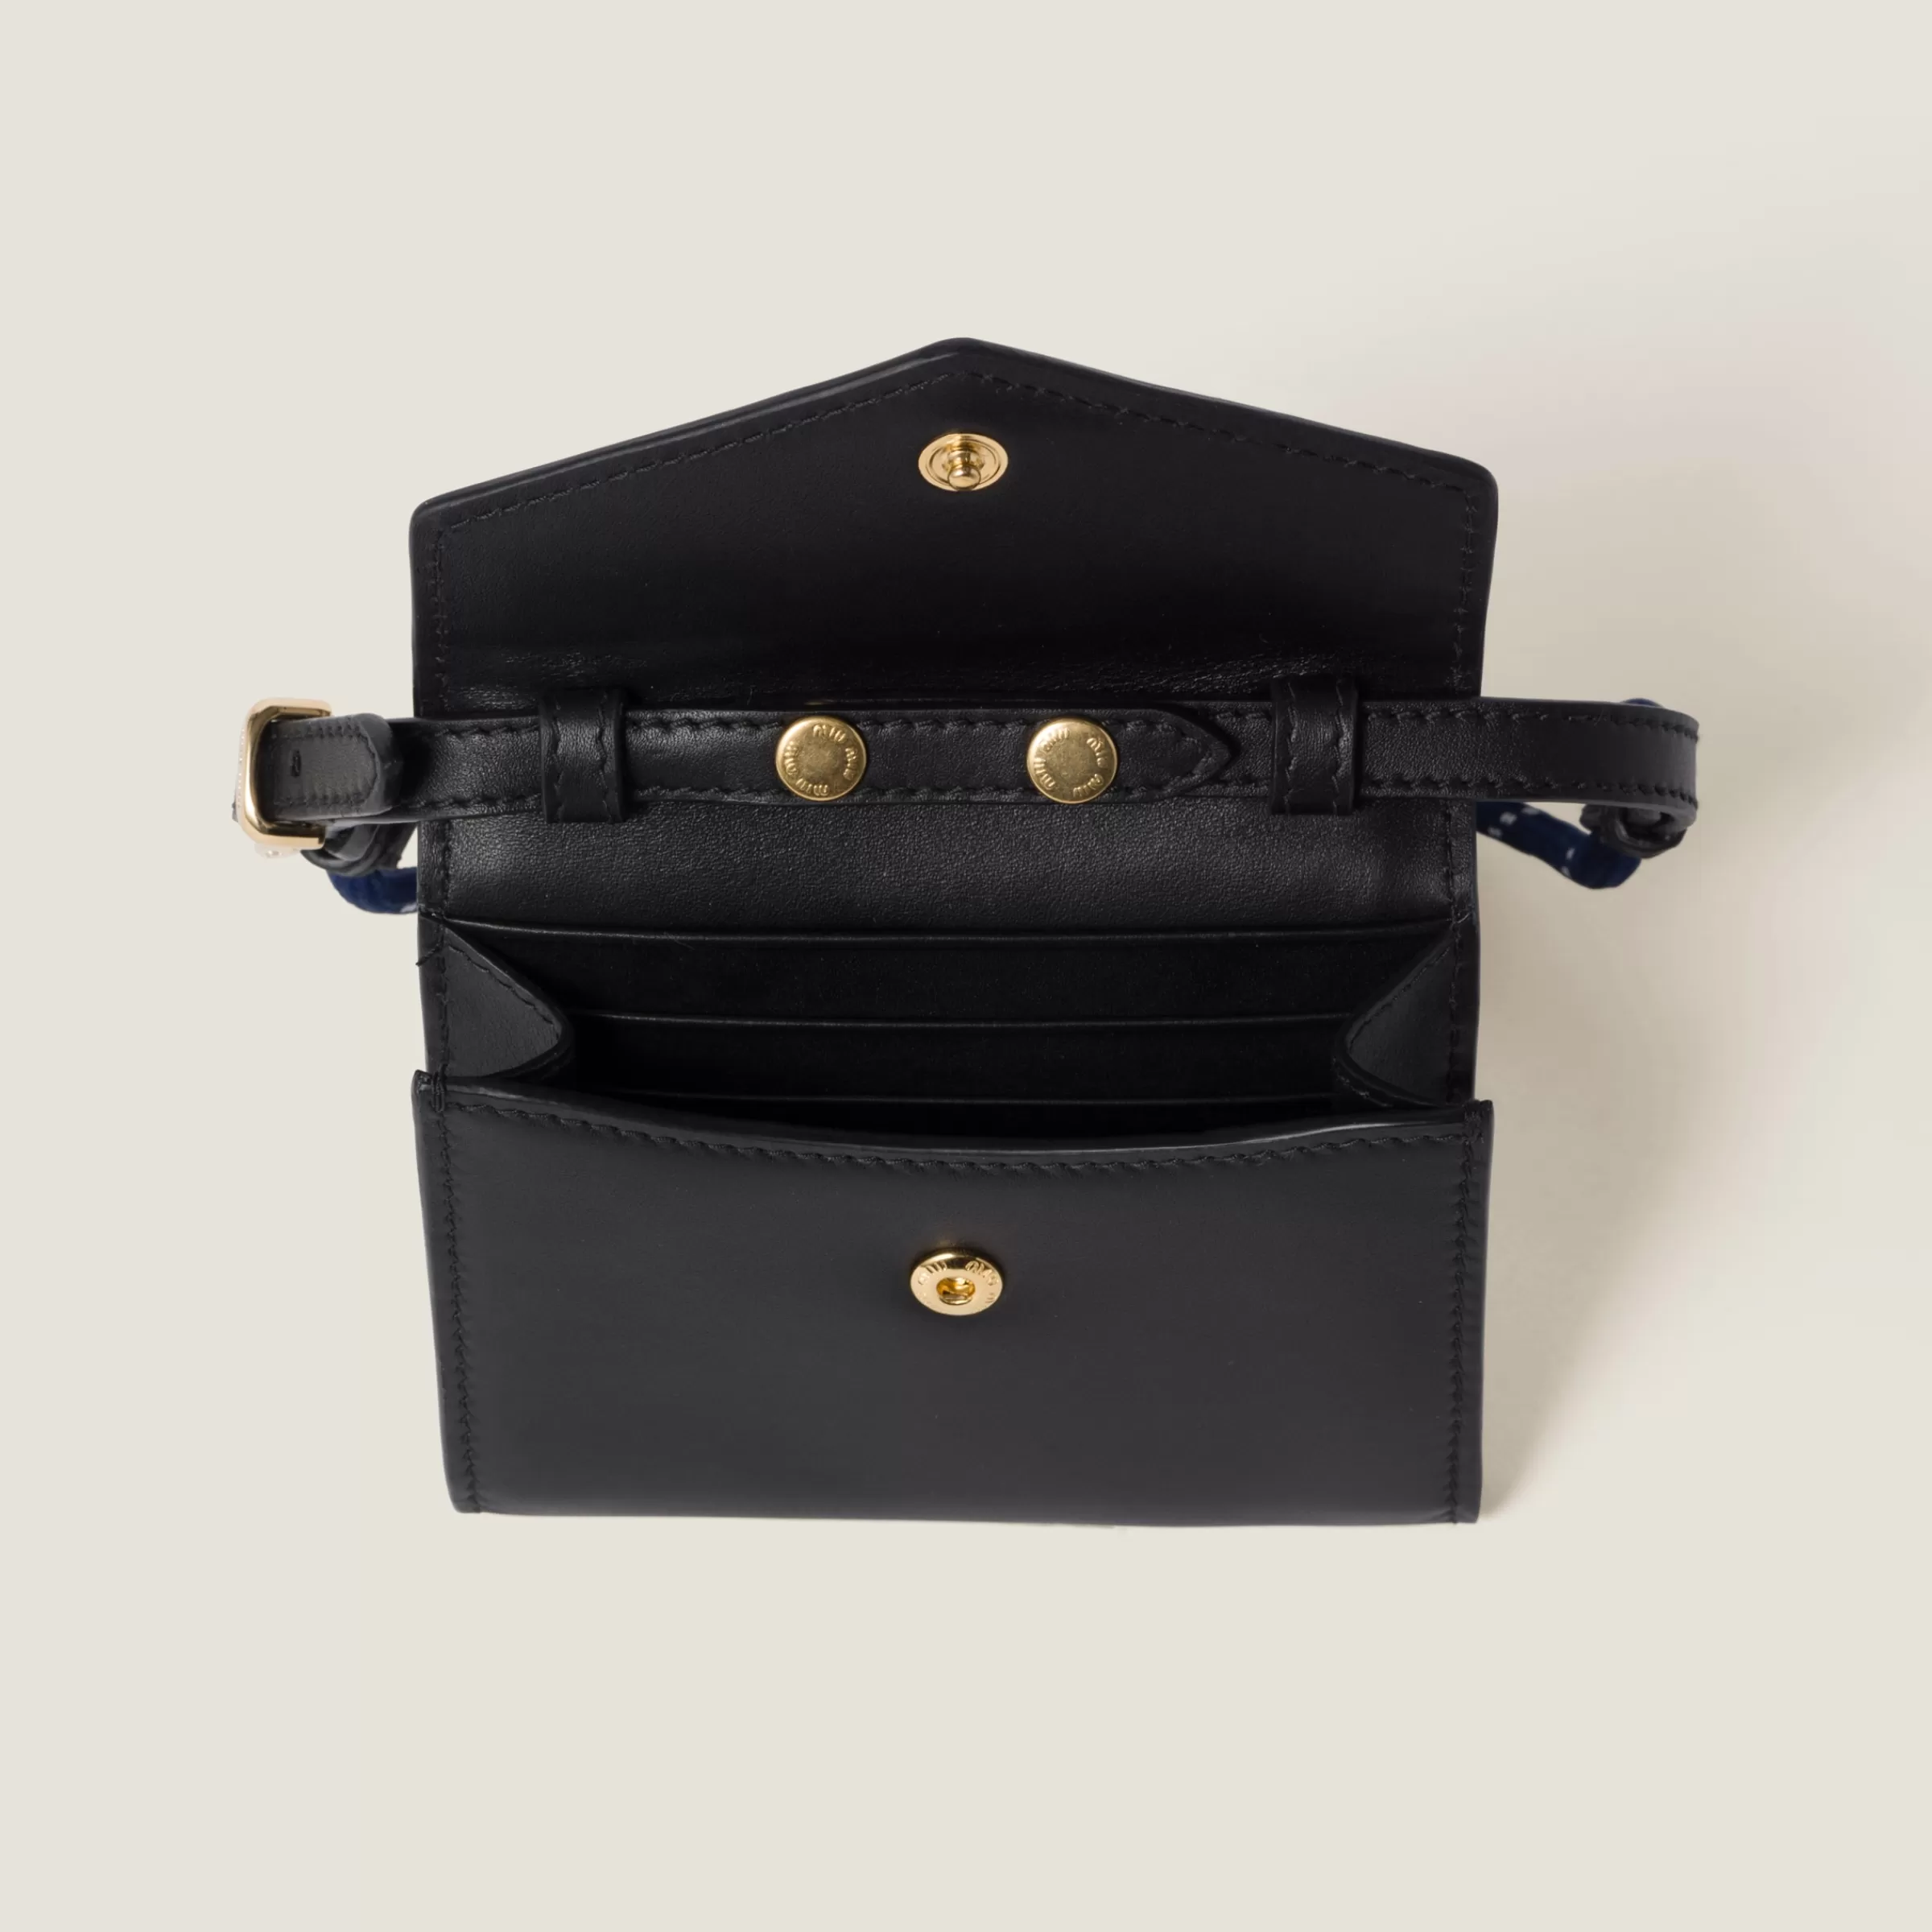 Miu Miu Leather Wallet With Leather And Cord Shoulder Strap |